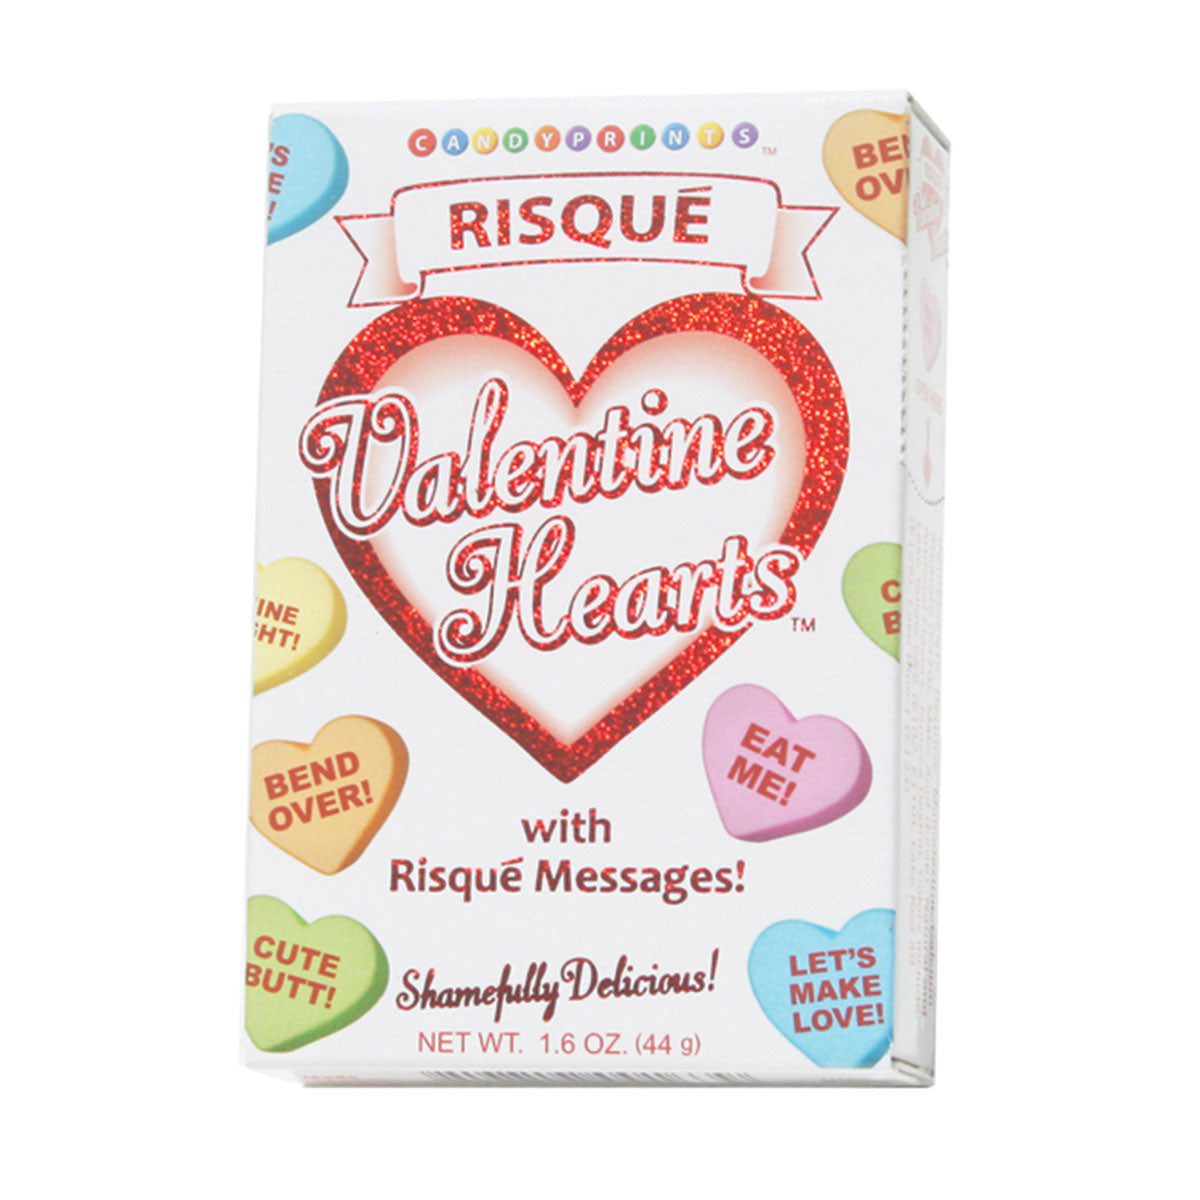 Risque Valentine Hearts Candy 24pc Display